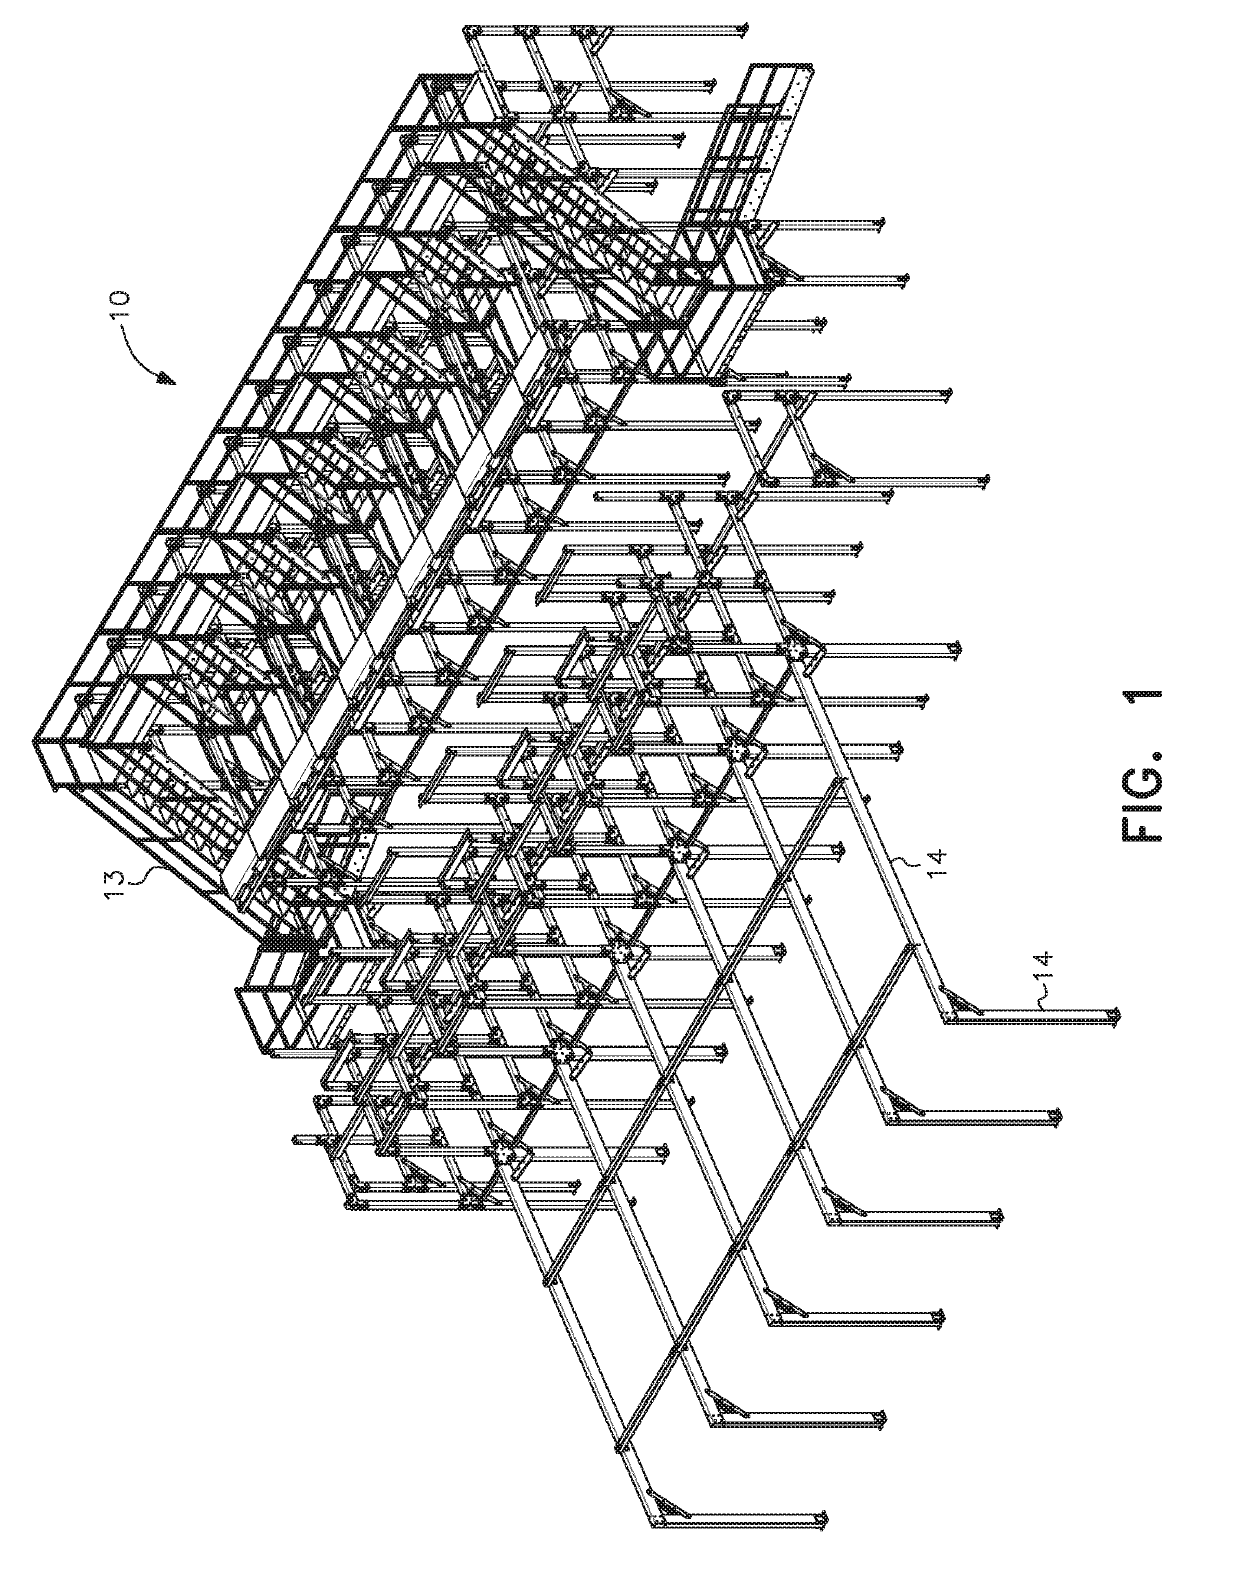 Tubular mezzanine and conveyor support structures and stiffener brackets for assembly thereof